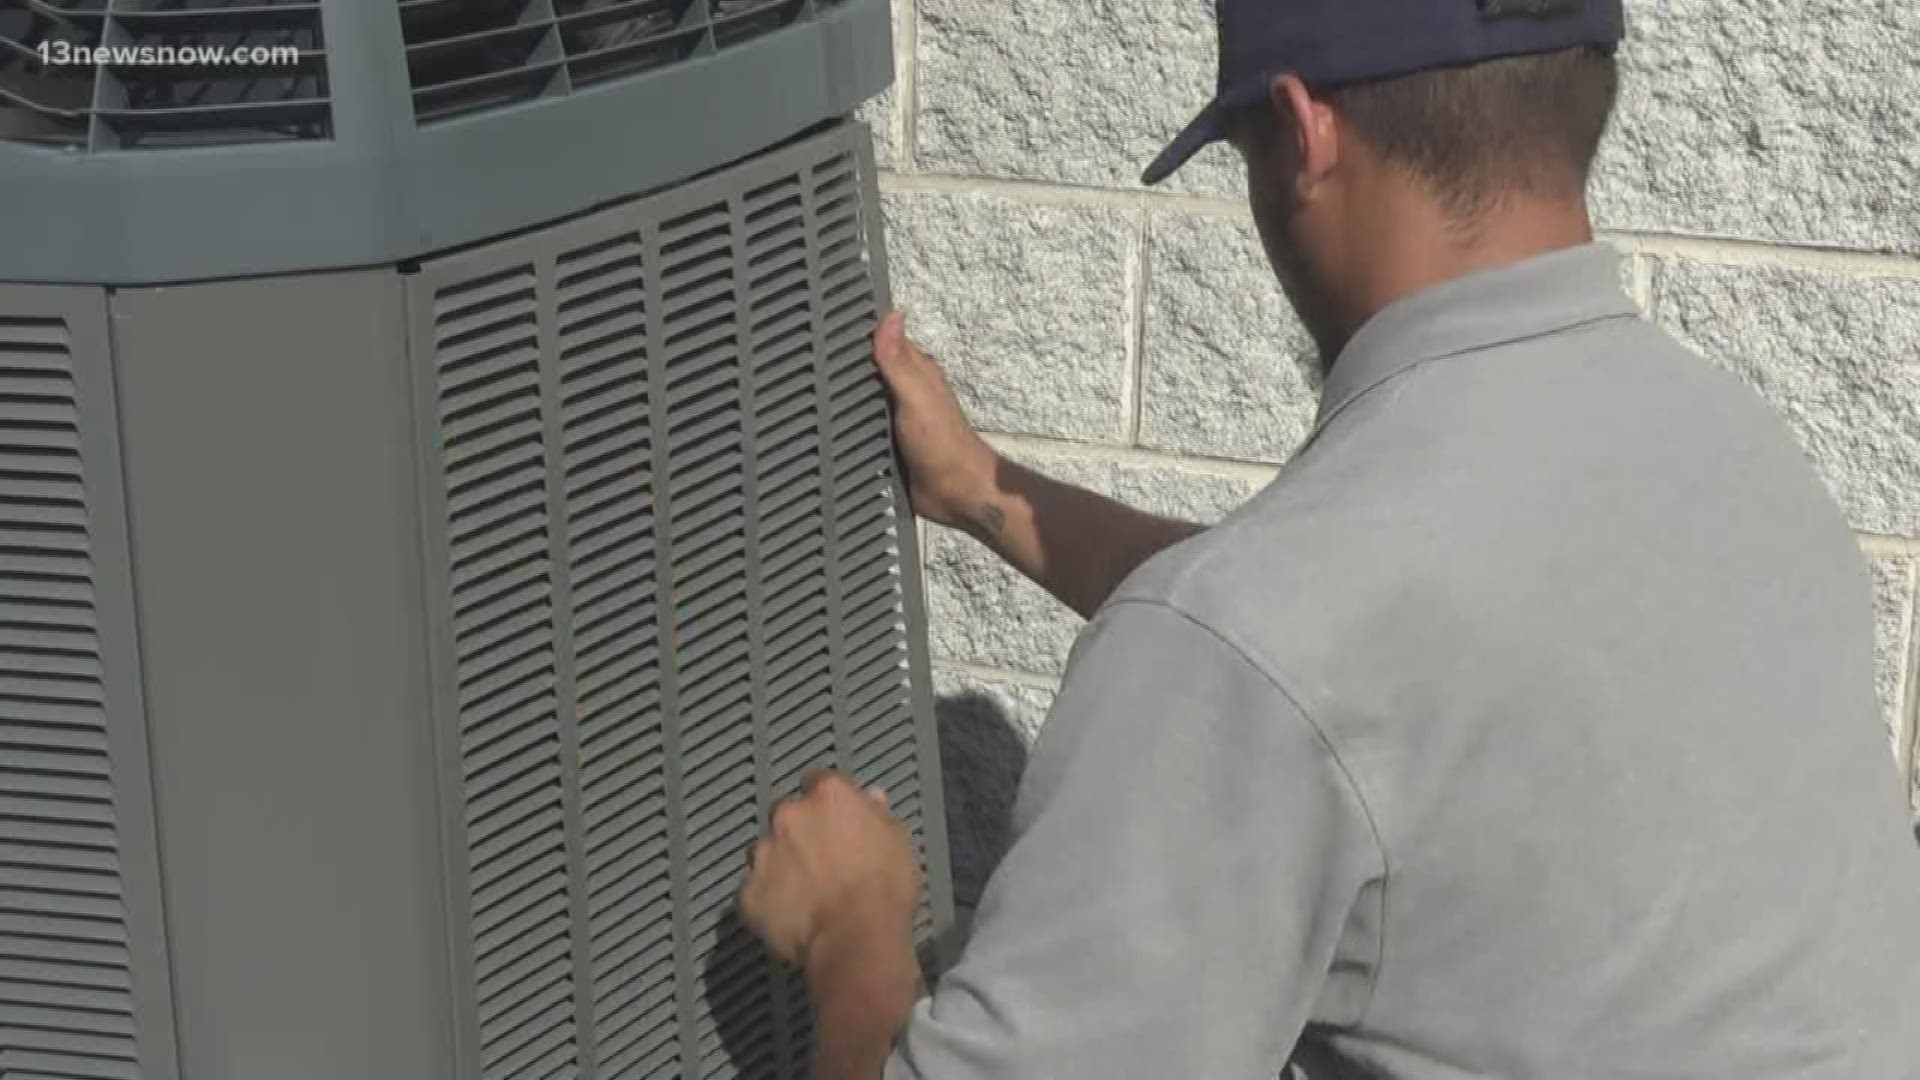 Mechanical Service Company of Virginia Beach is making about 45 house calls a day when it comes to air conditioning maintenance and repairs. MSCO said in order to keep your air conditioning from breaking down during a 95-degree day it’s best to get routine check-ups twice a year.